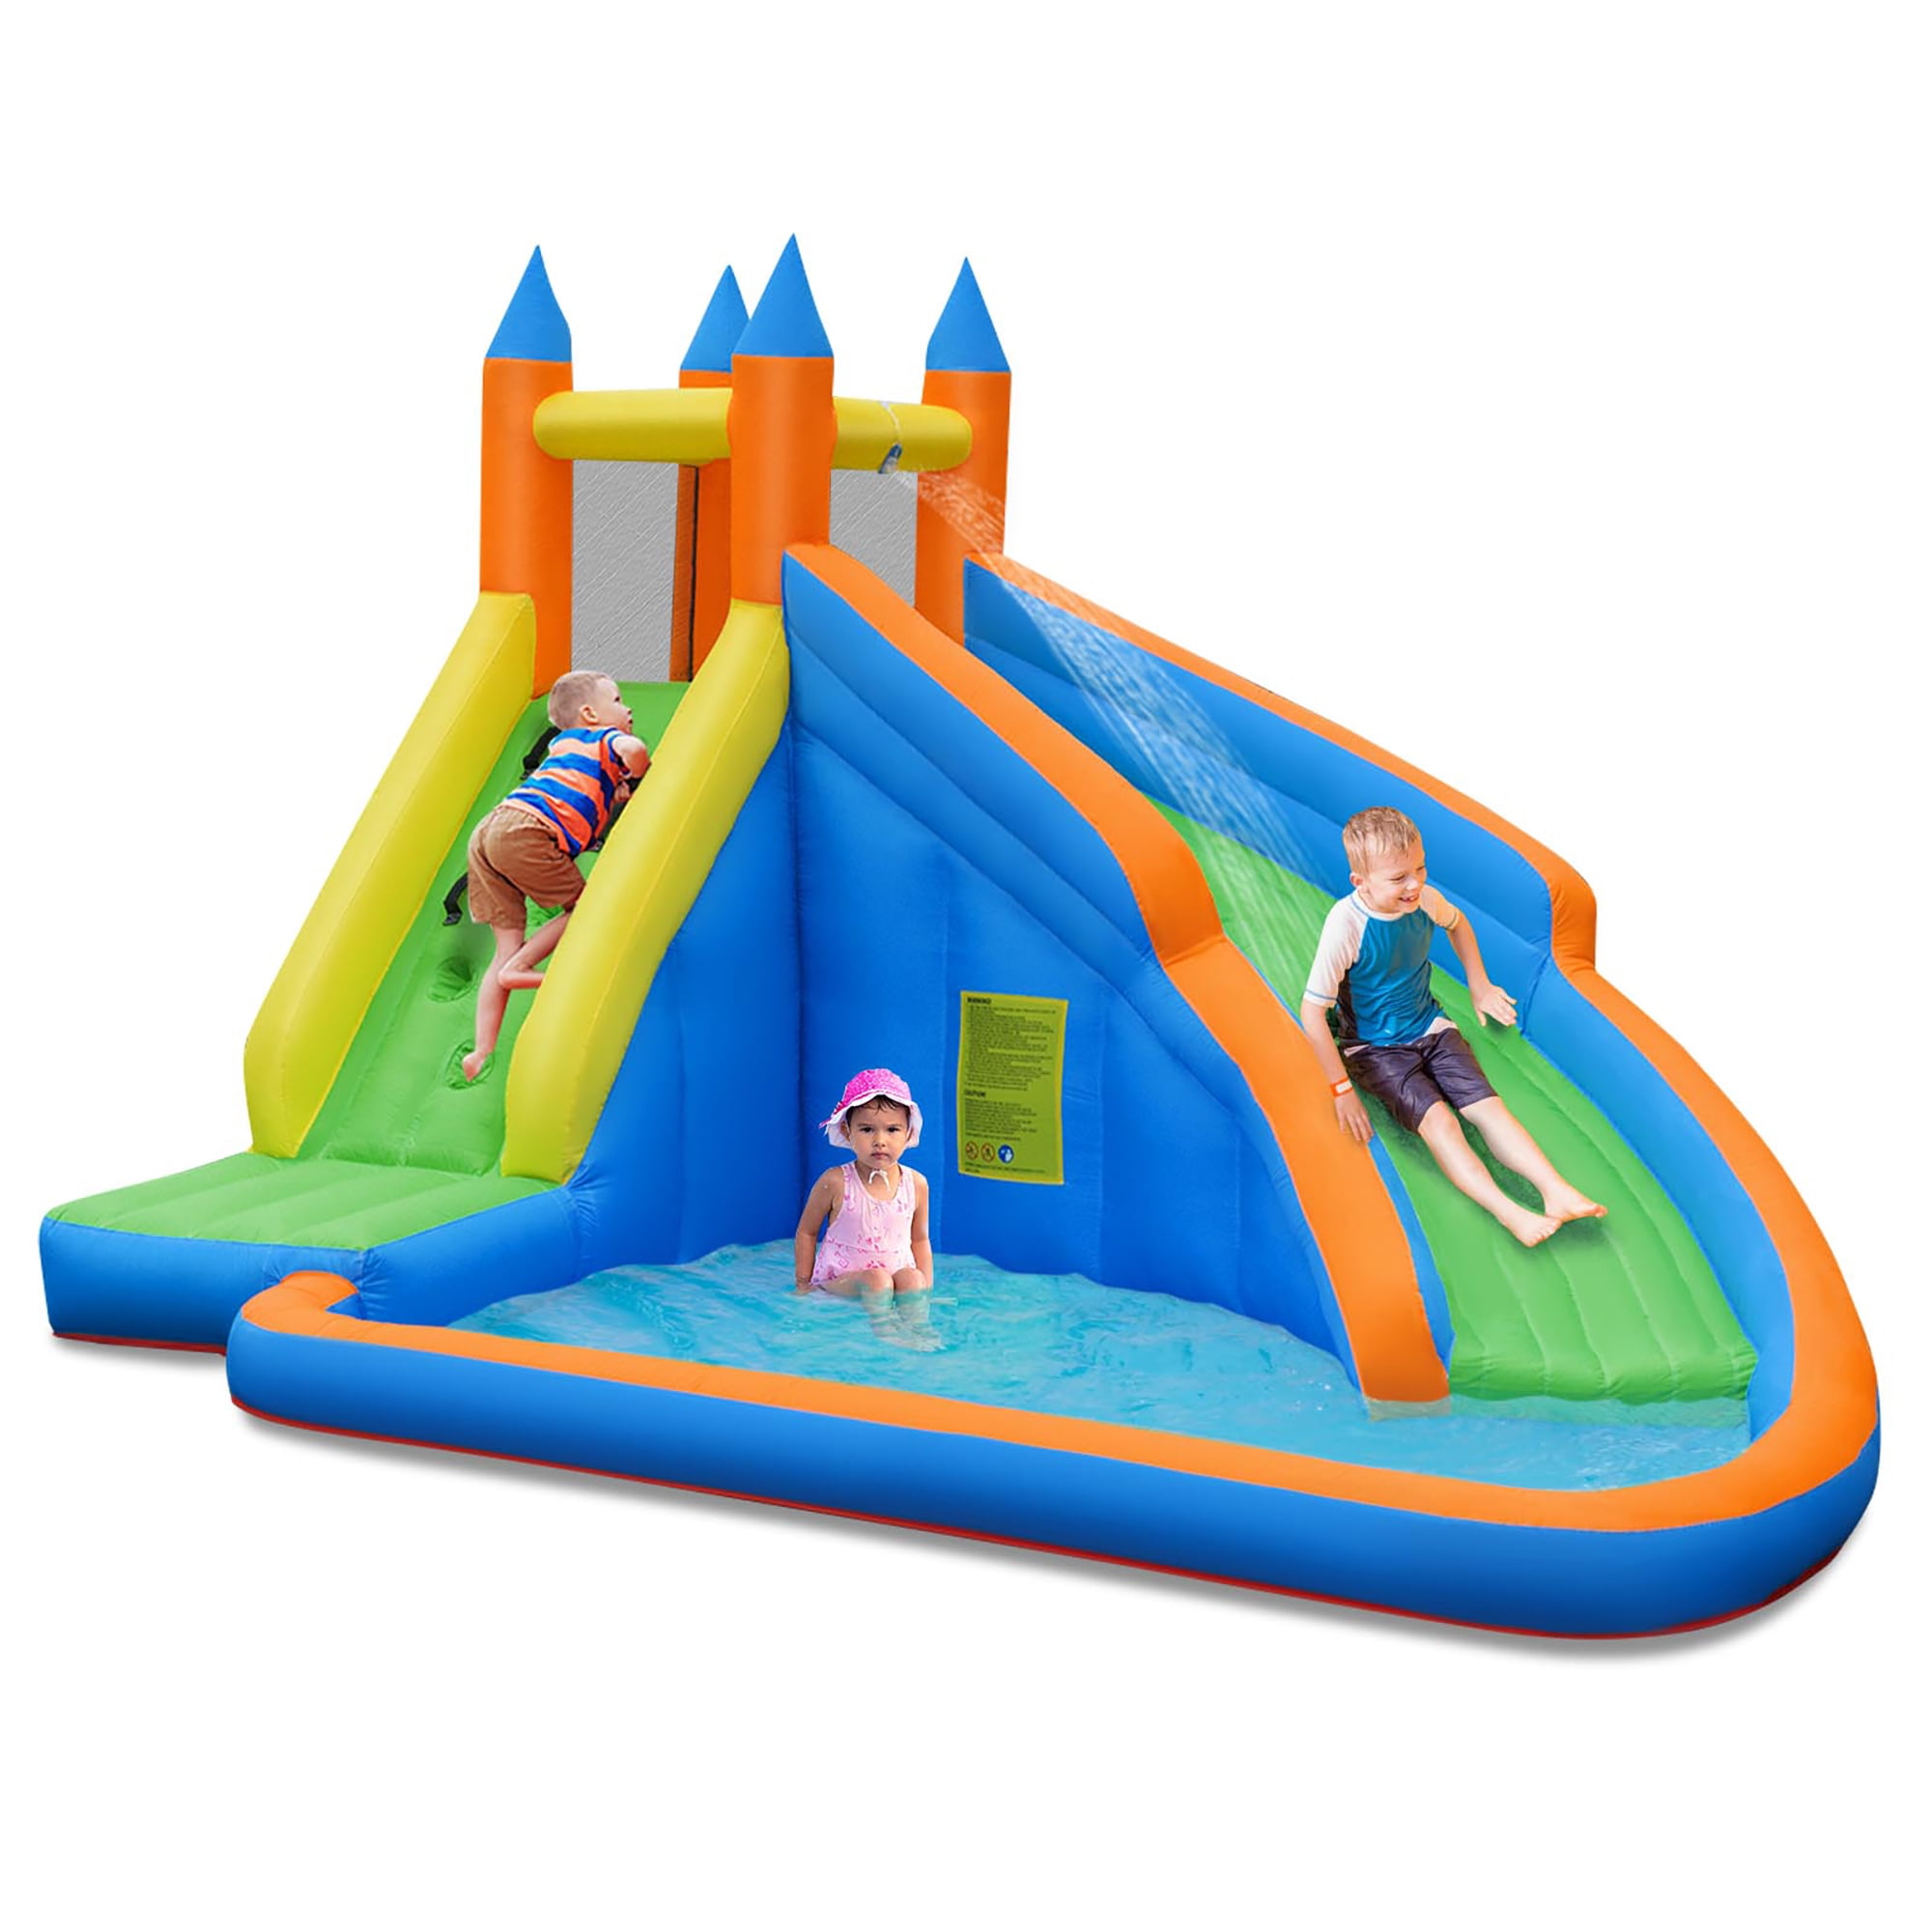 Big Kids Bouncy Castle for Outdoor Indoor Party Toddler Backyard Playhouse Step4Fun Inflatable Bounce House Water Slides Including Blower Climbing Wall Splash Pool